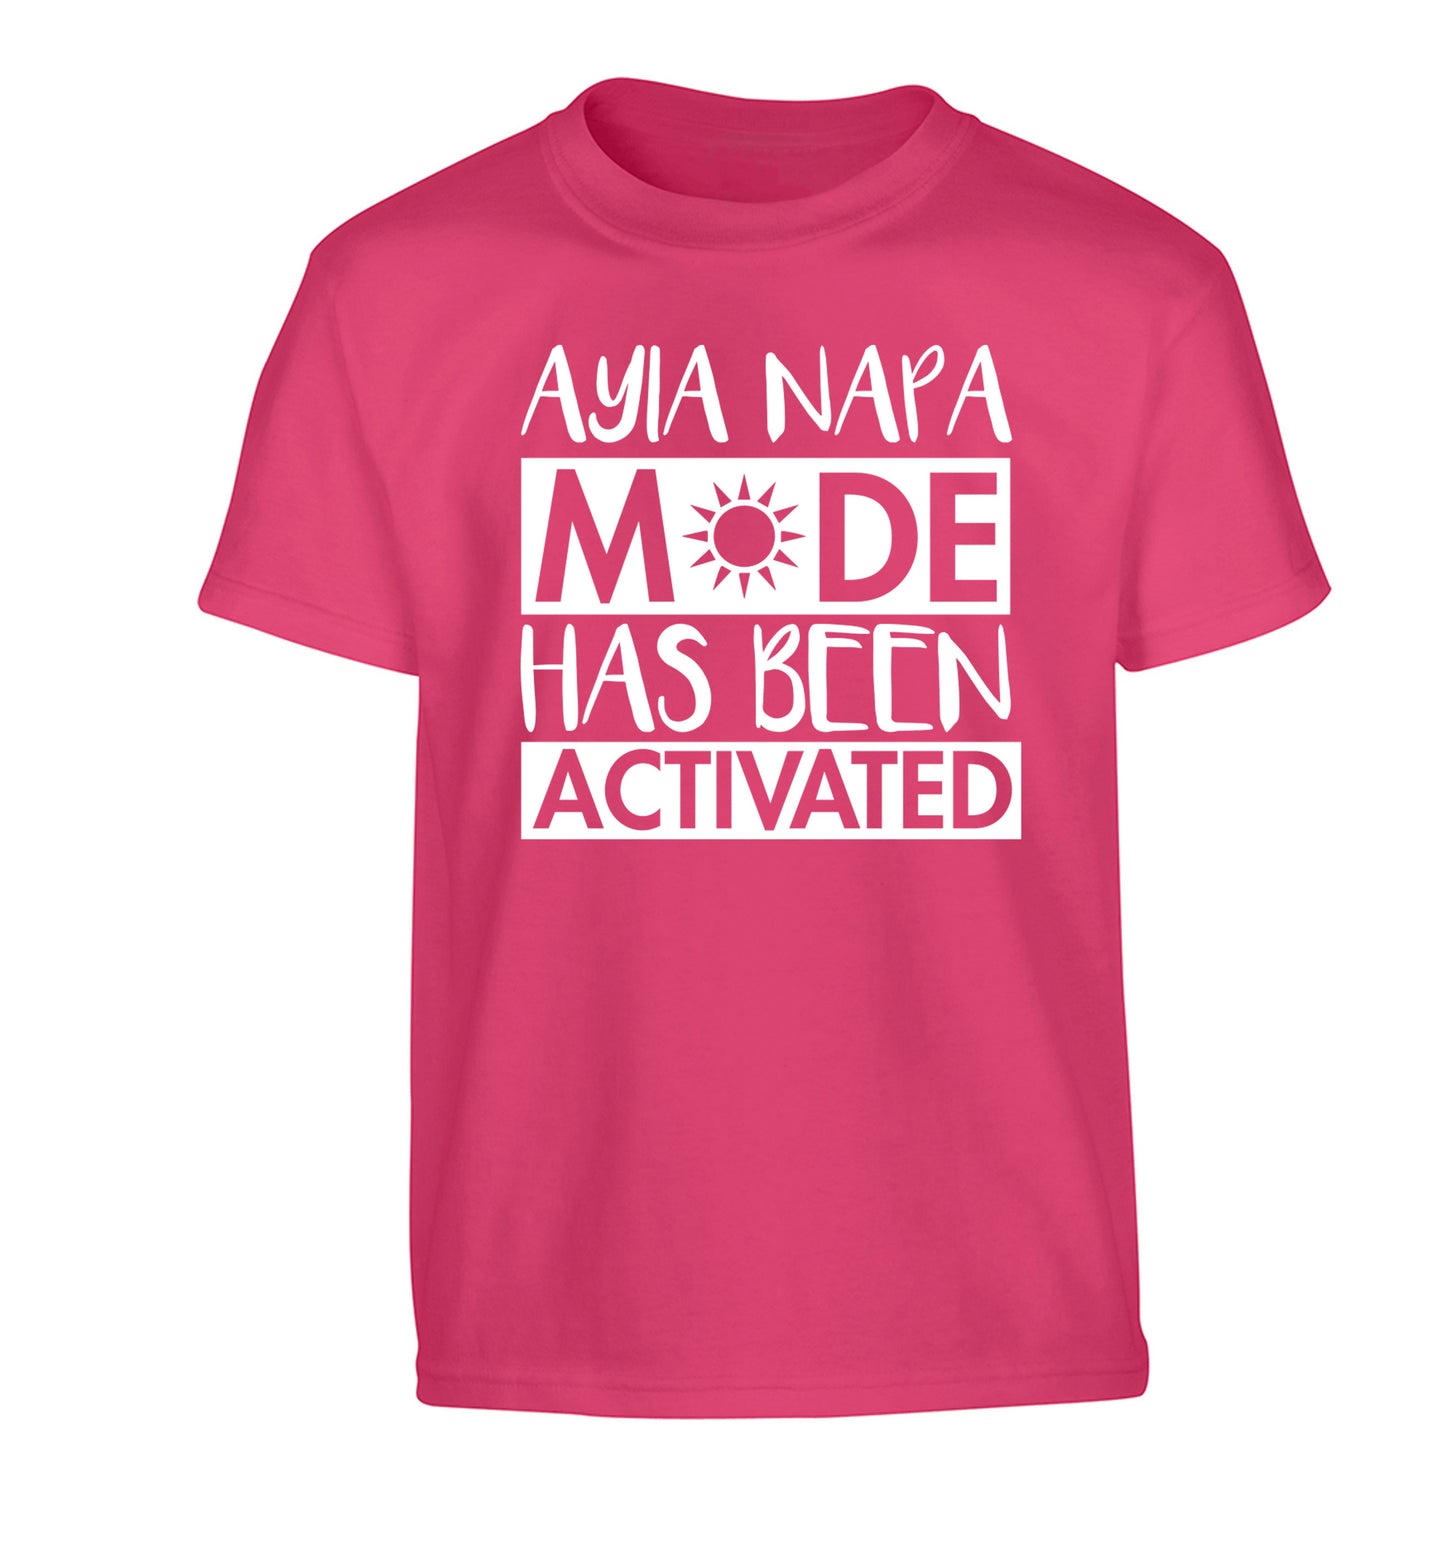 Aiya Napa mode has been activated Children's pink Tshirt 12-14 Years